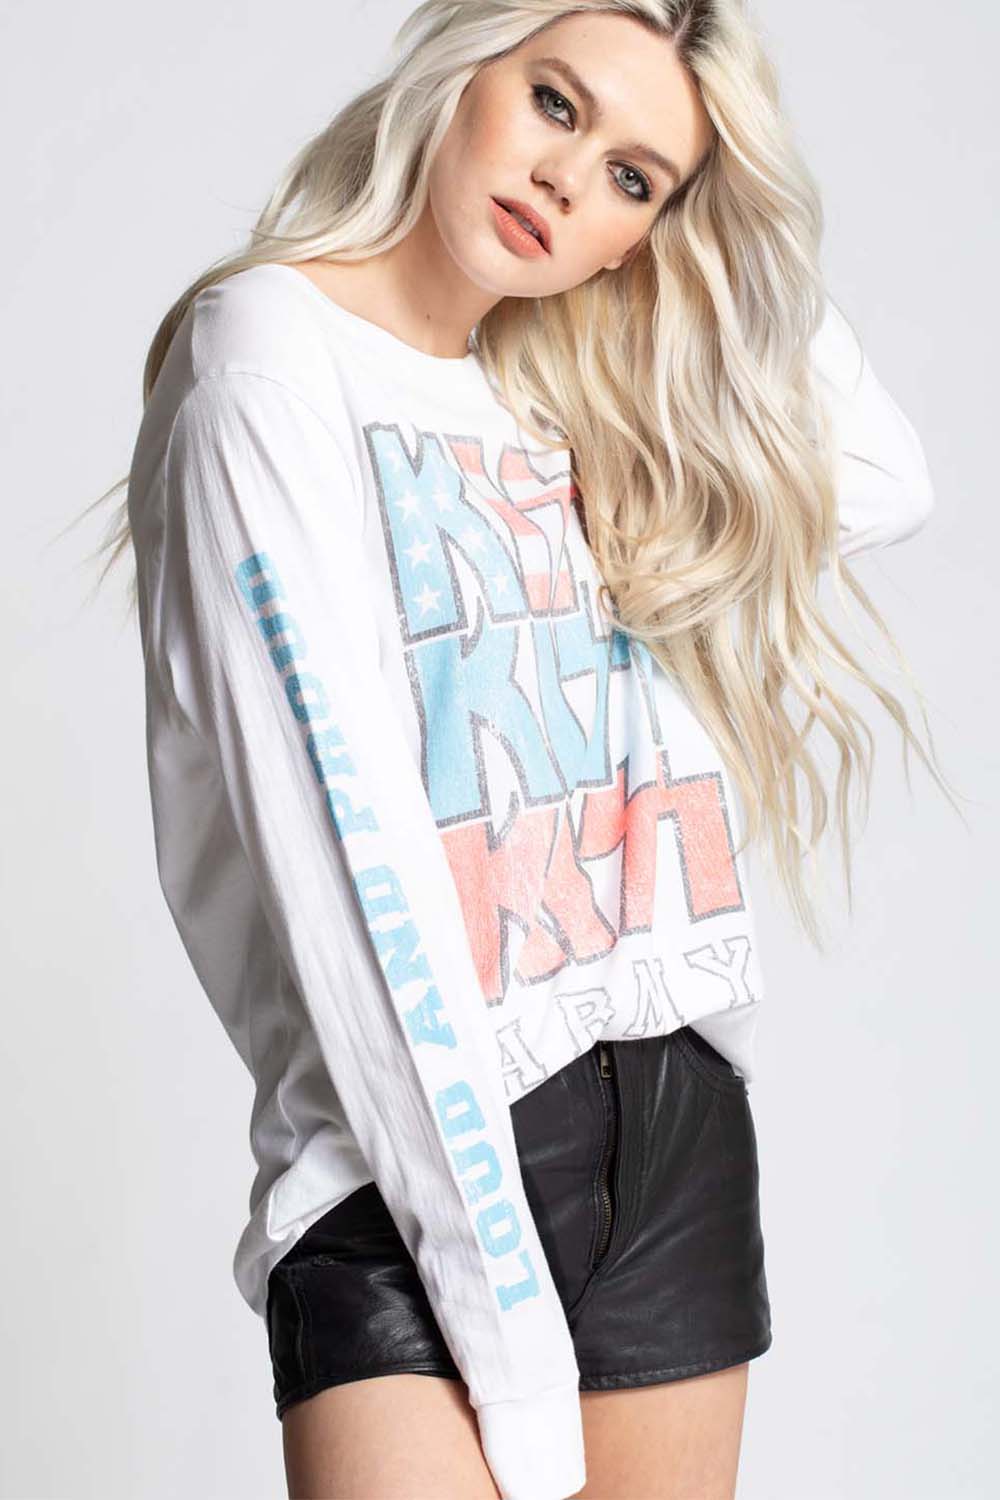 KISS Army Loud and Proud Long Sleeve Tee by Recycled Karma Brands